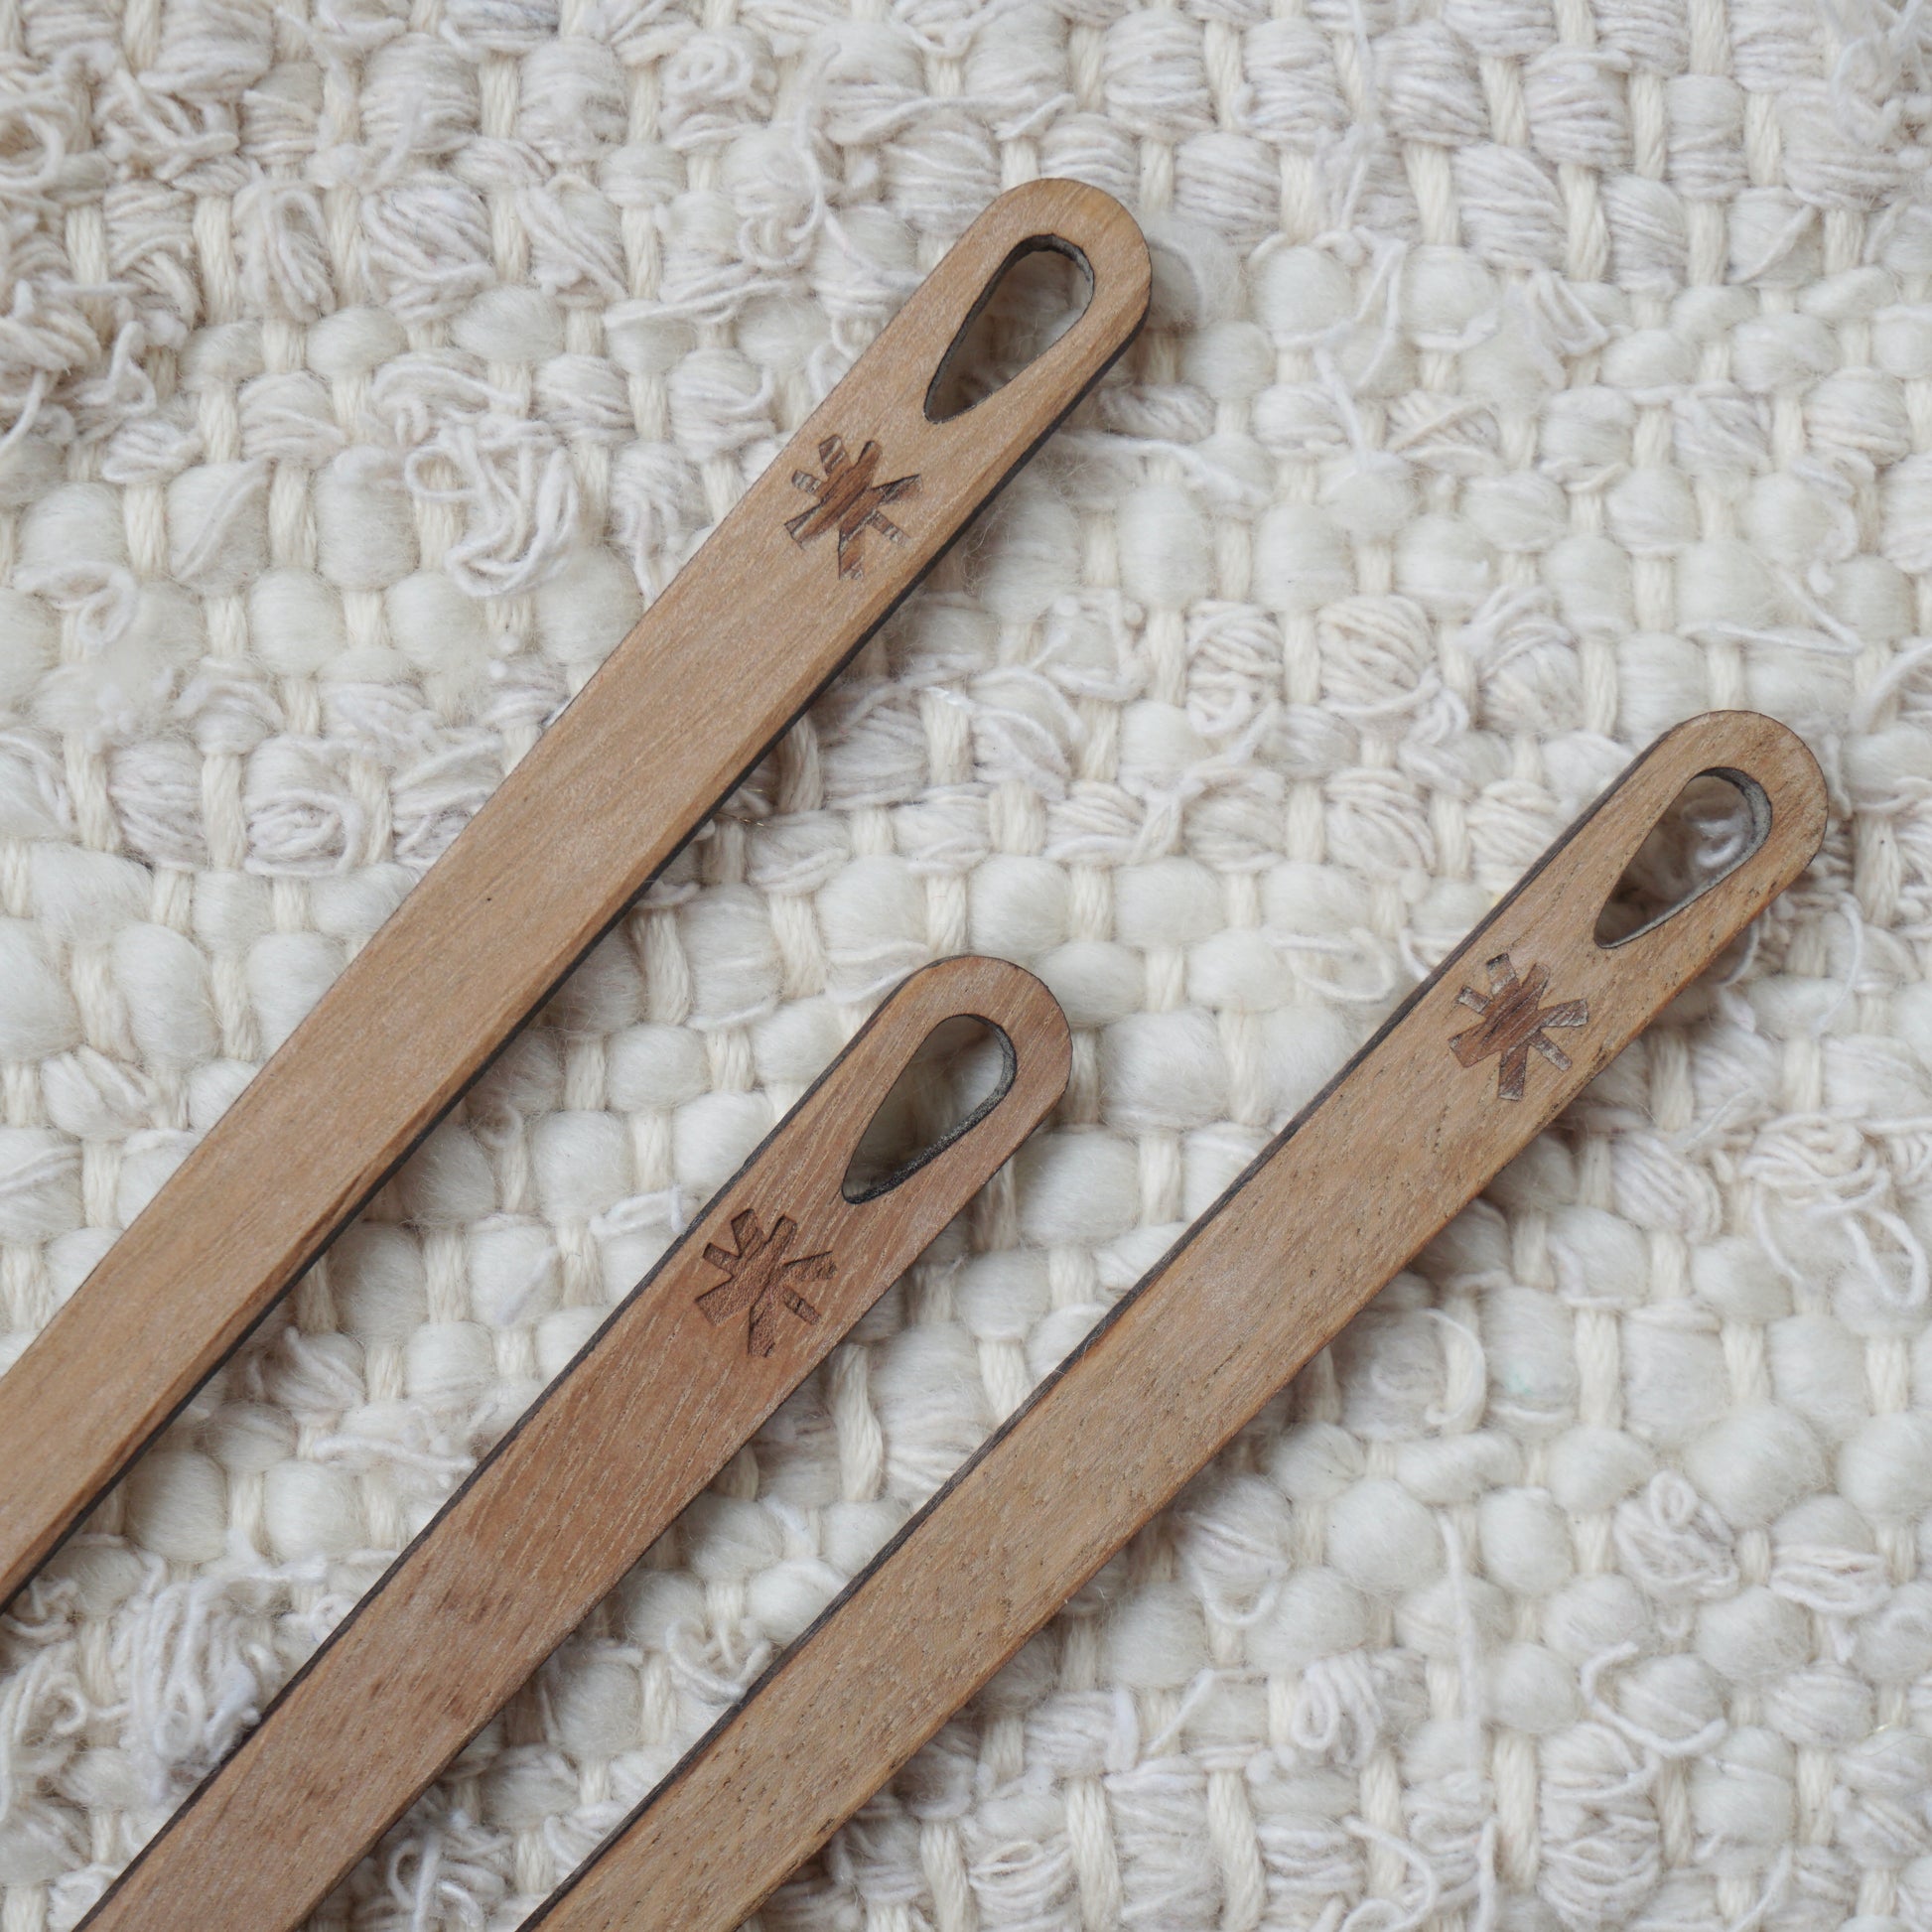 Pack of 2 Weaving Needles, Smooth and Pointy Wooden Tapestry